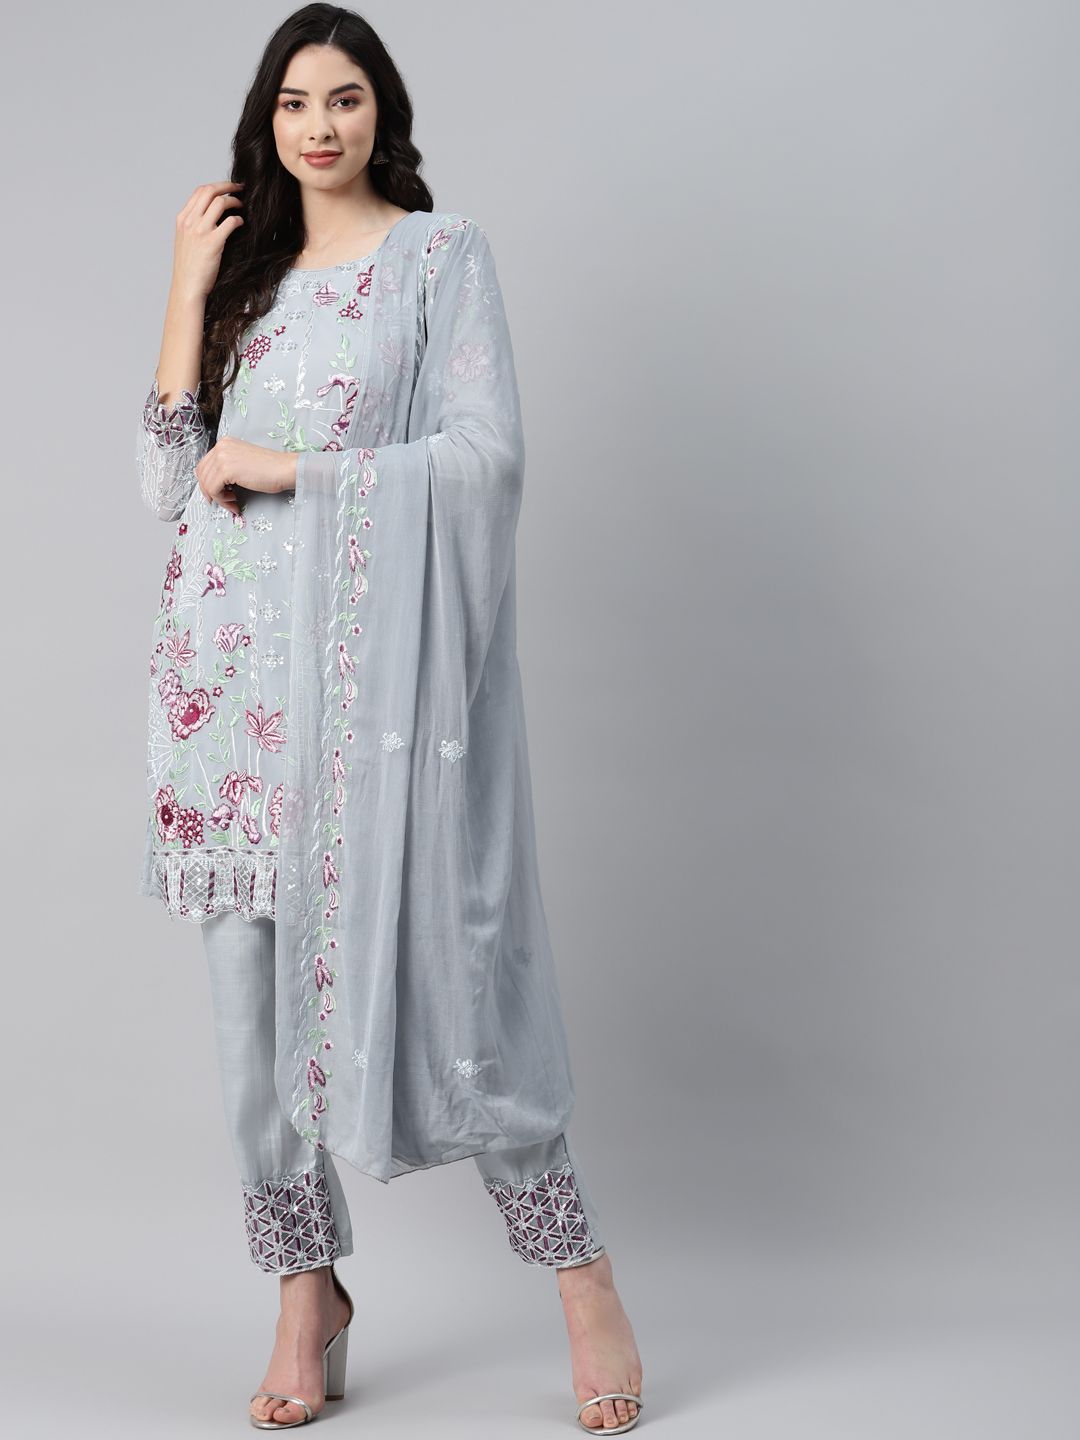 Readiprint Fashions Grey & White Embroidered Unstitched Dress Material Price in India